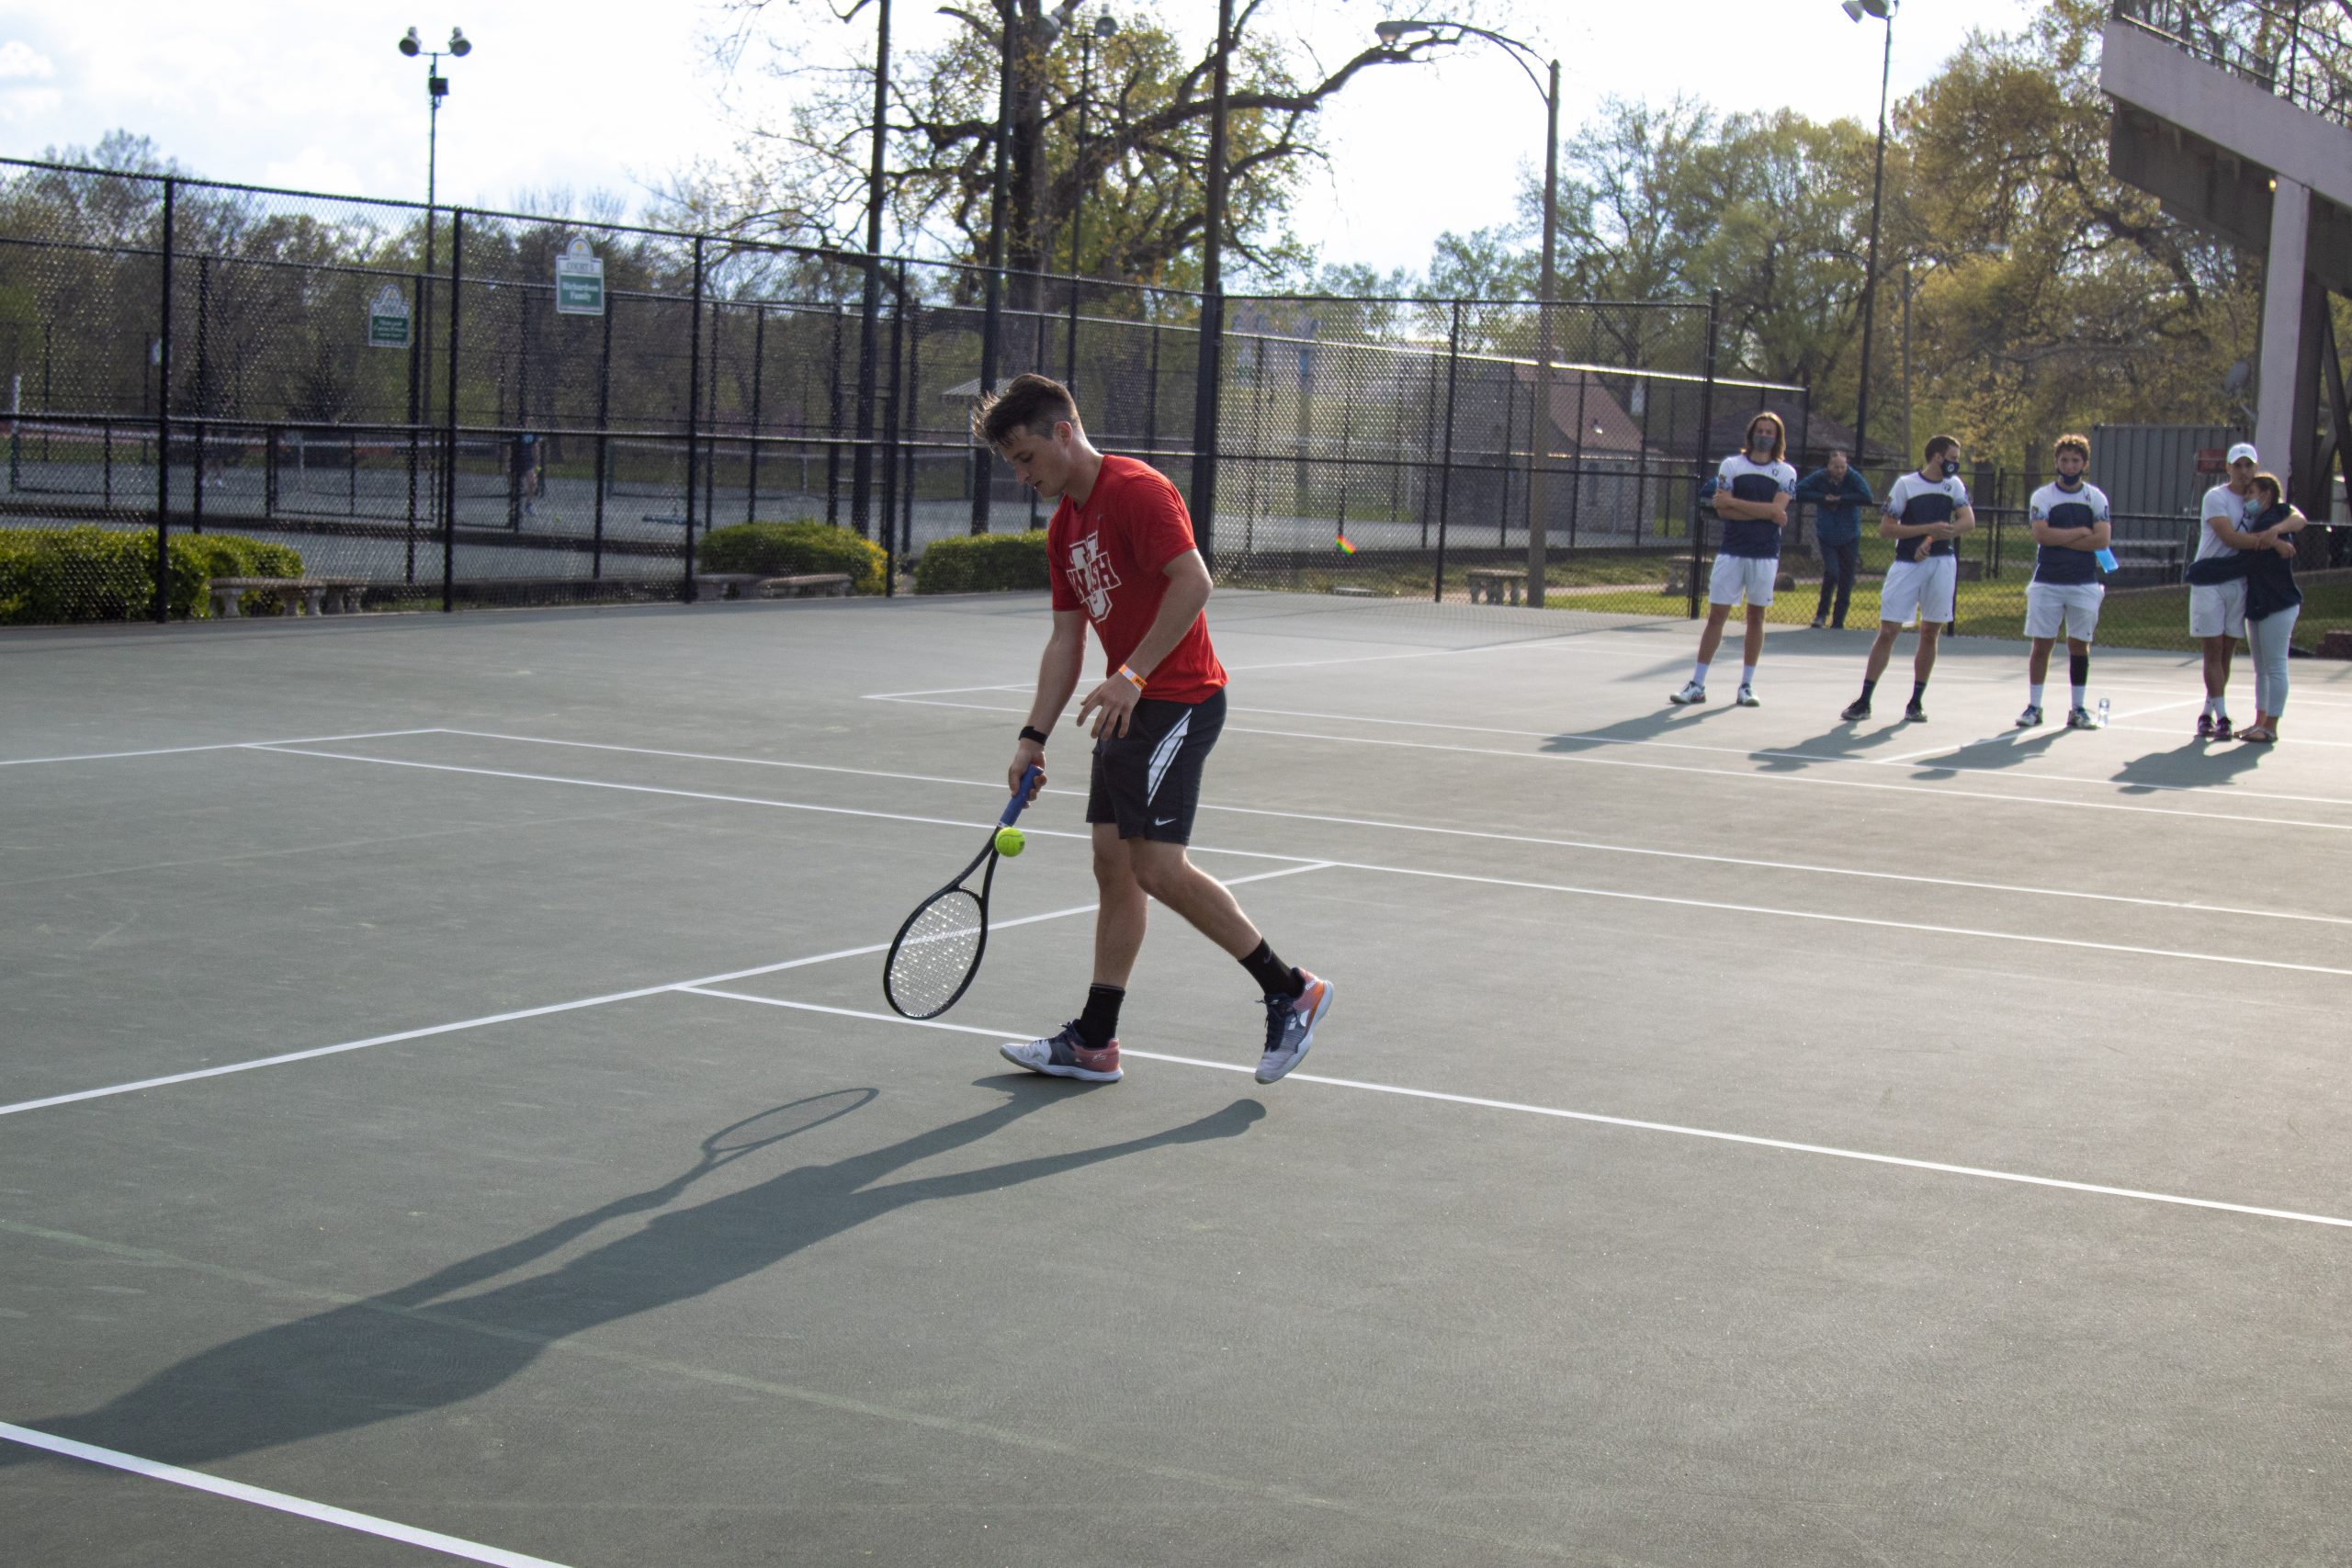 A tennis player wearing in red and shrouded in shadow holds his racquet in his right hand toward his outstretched right leg, as opponents in black uniforms watch from the upper right corner.